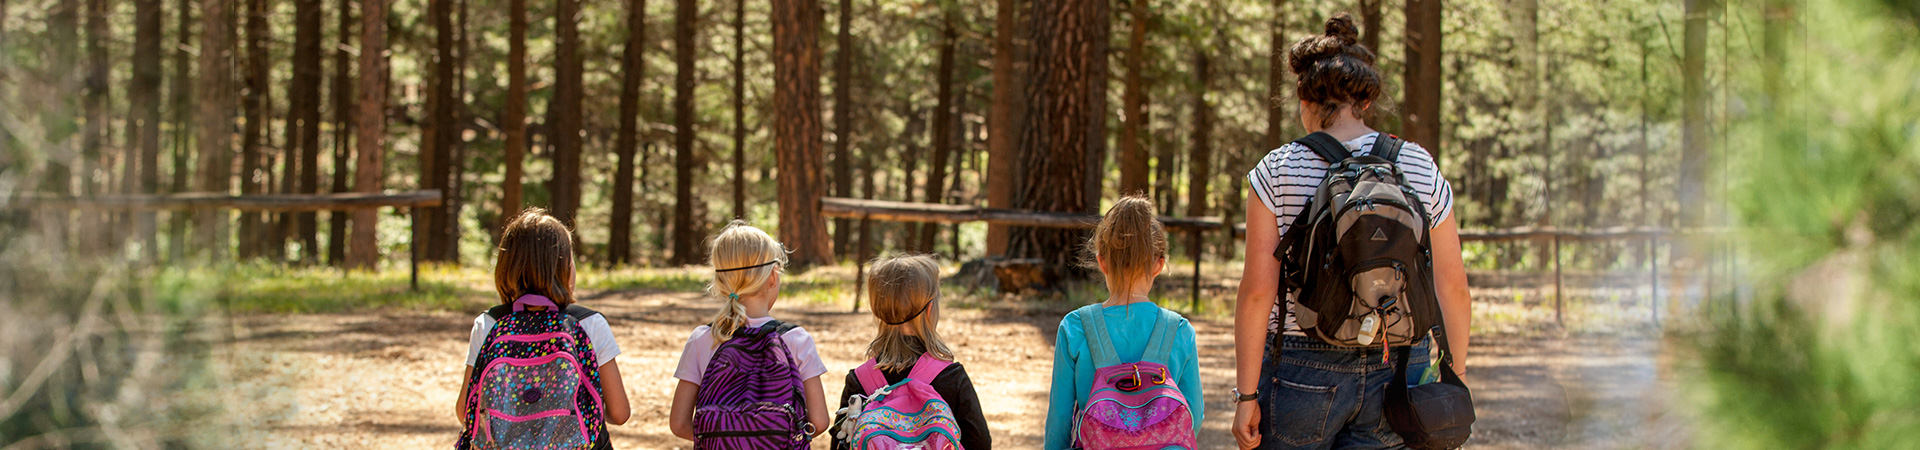  group of girls with backpacks walking through wood with adult volunteer 